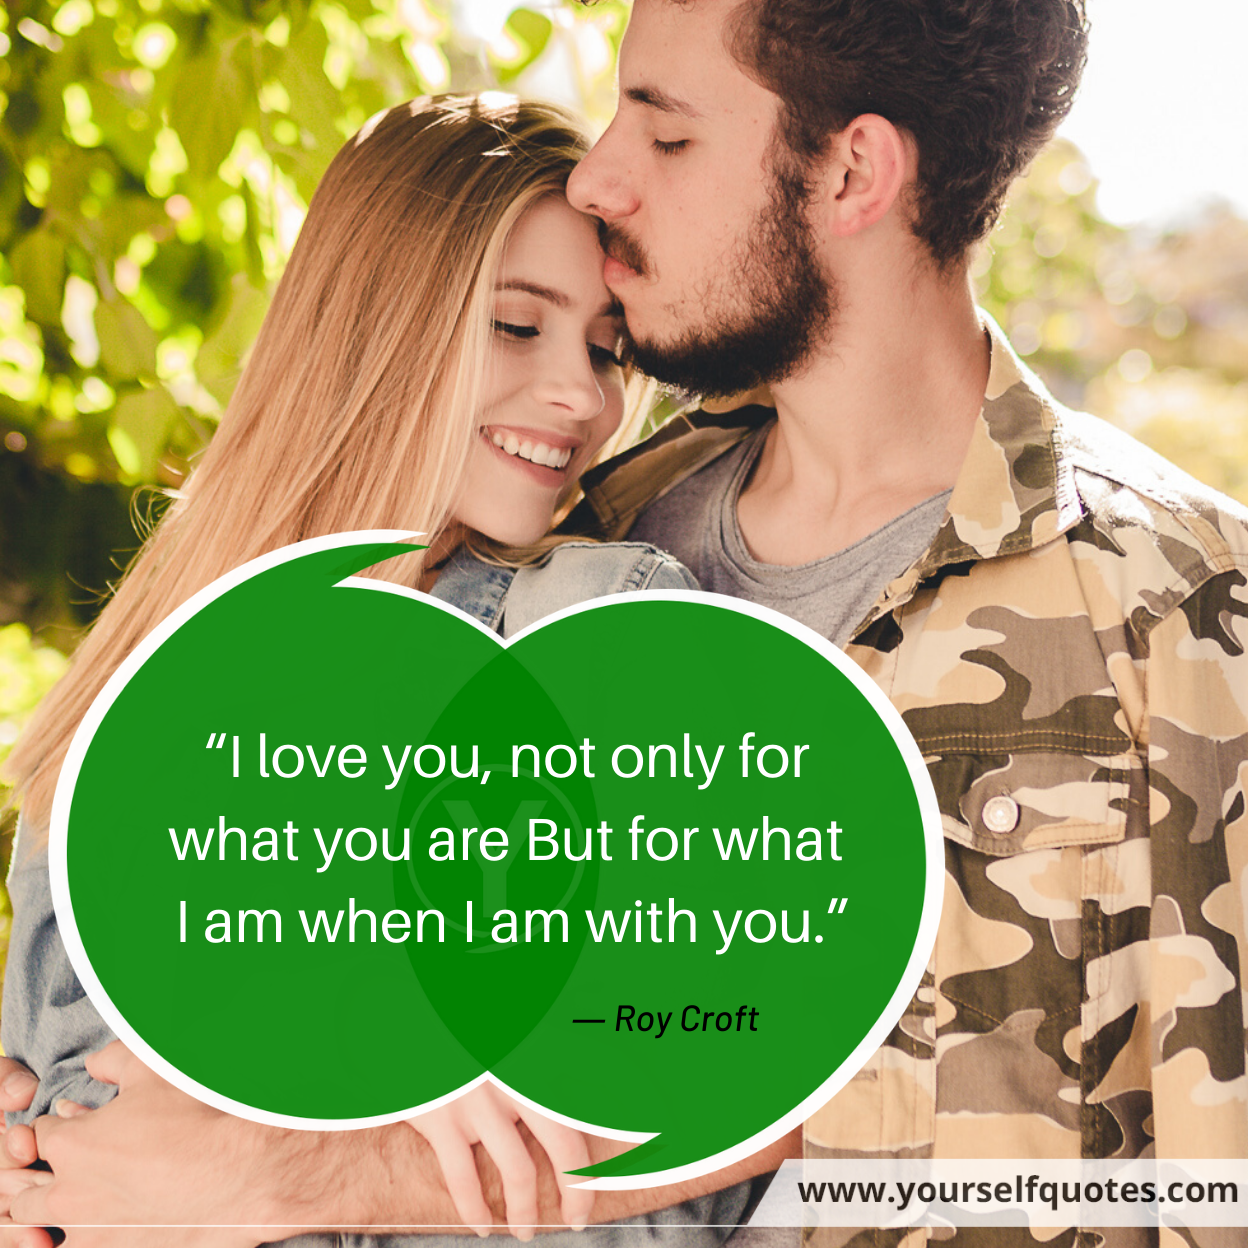 Quotes on Love by Roy Croft